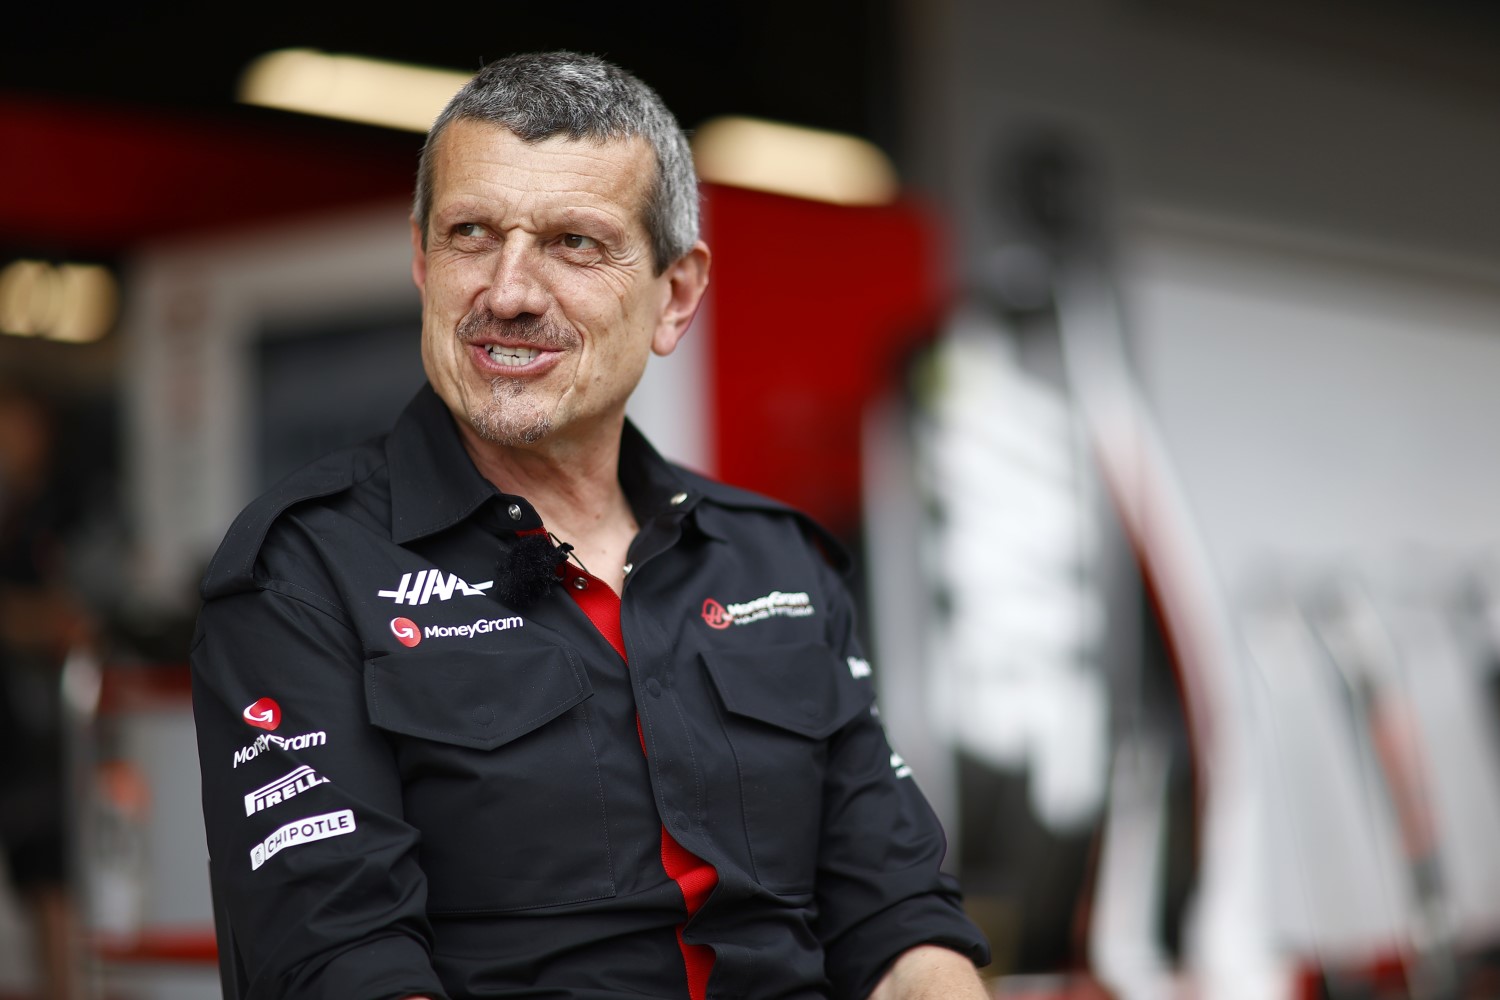 Guenther Steiner, Team Principal, Haas F1 Team sits down for an interview during the Spanish GP at Circuit de Barcelona-Catalunya on Thursday June 01, 2023 in Barcelona, Spain. (Photo by Andy Hone / LAT Images)